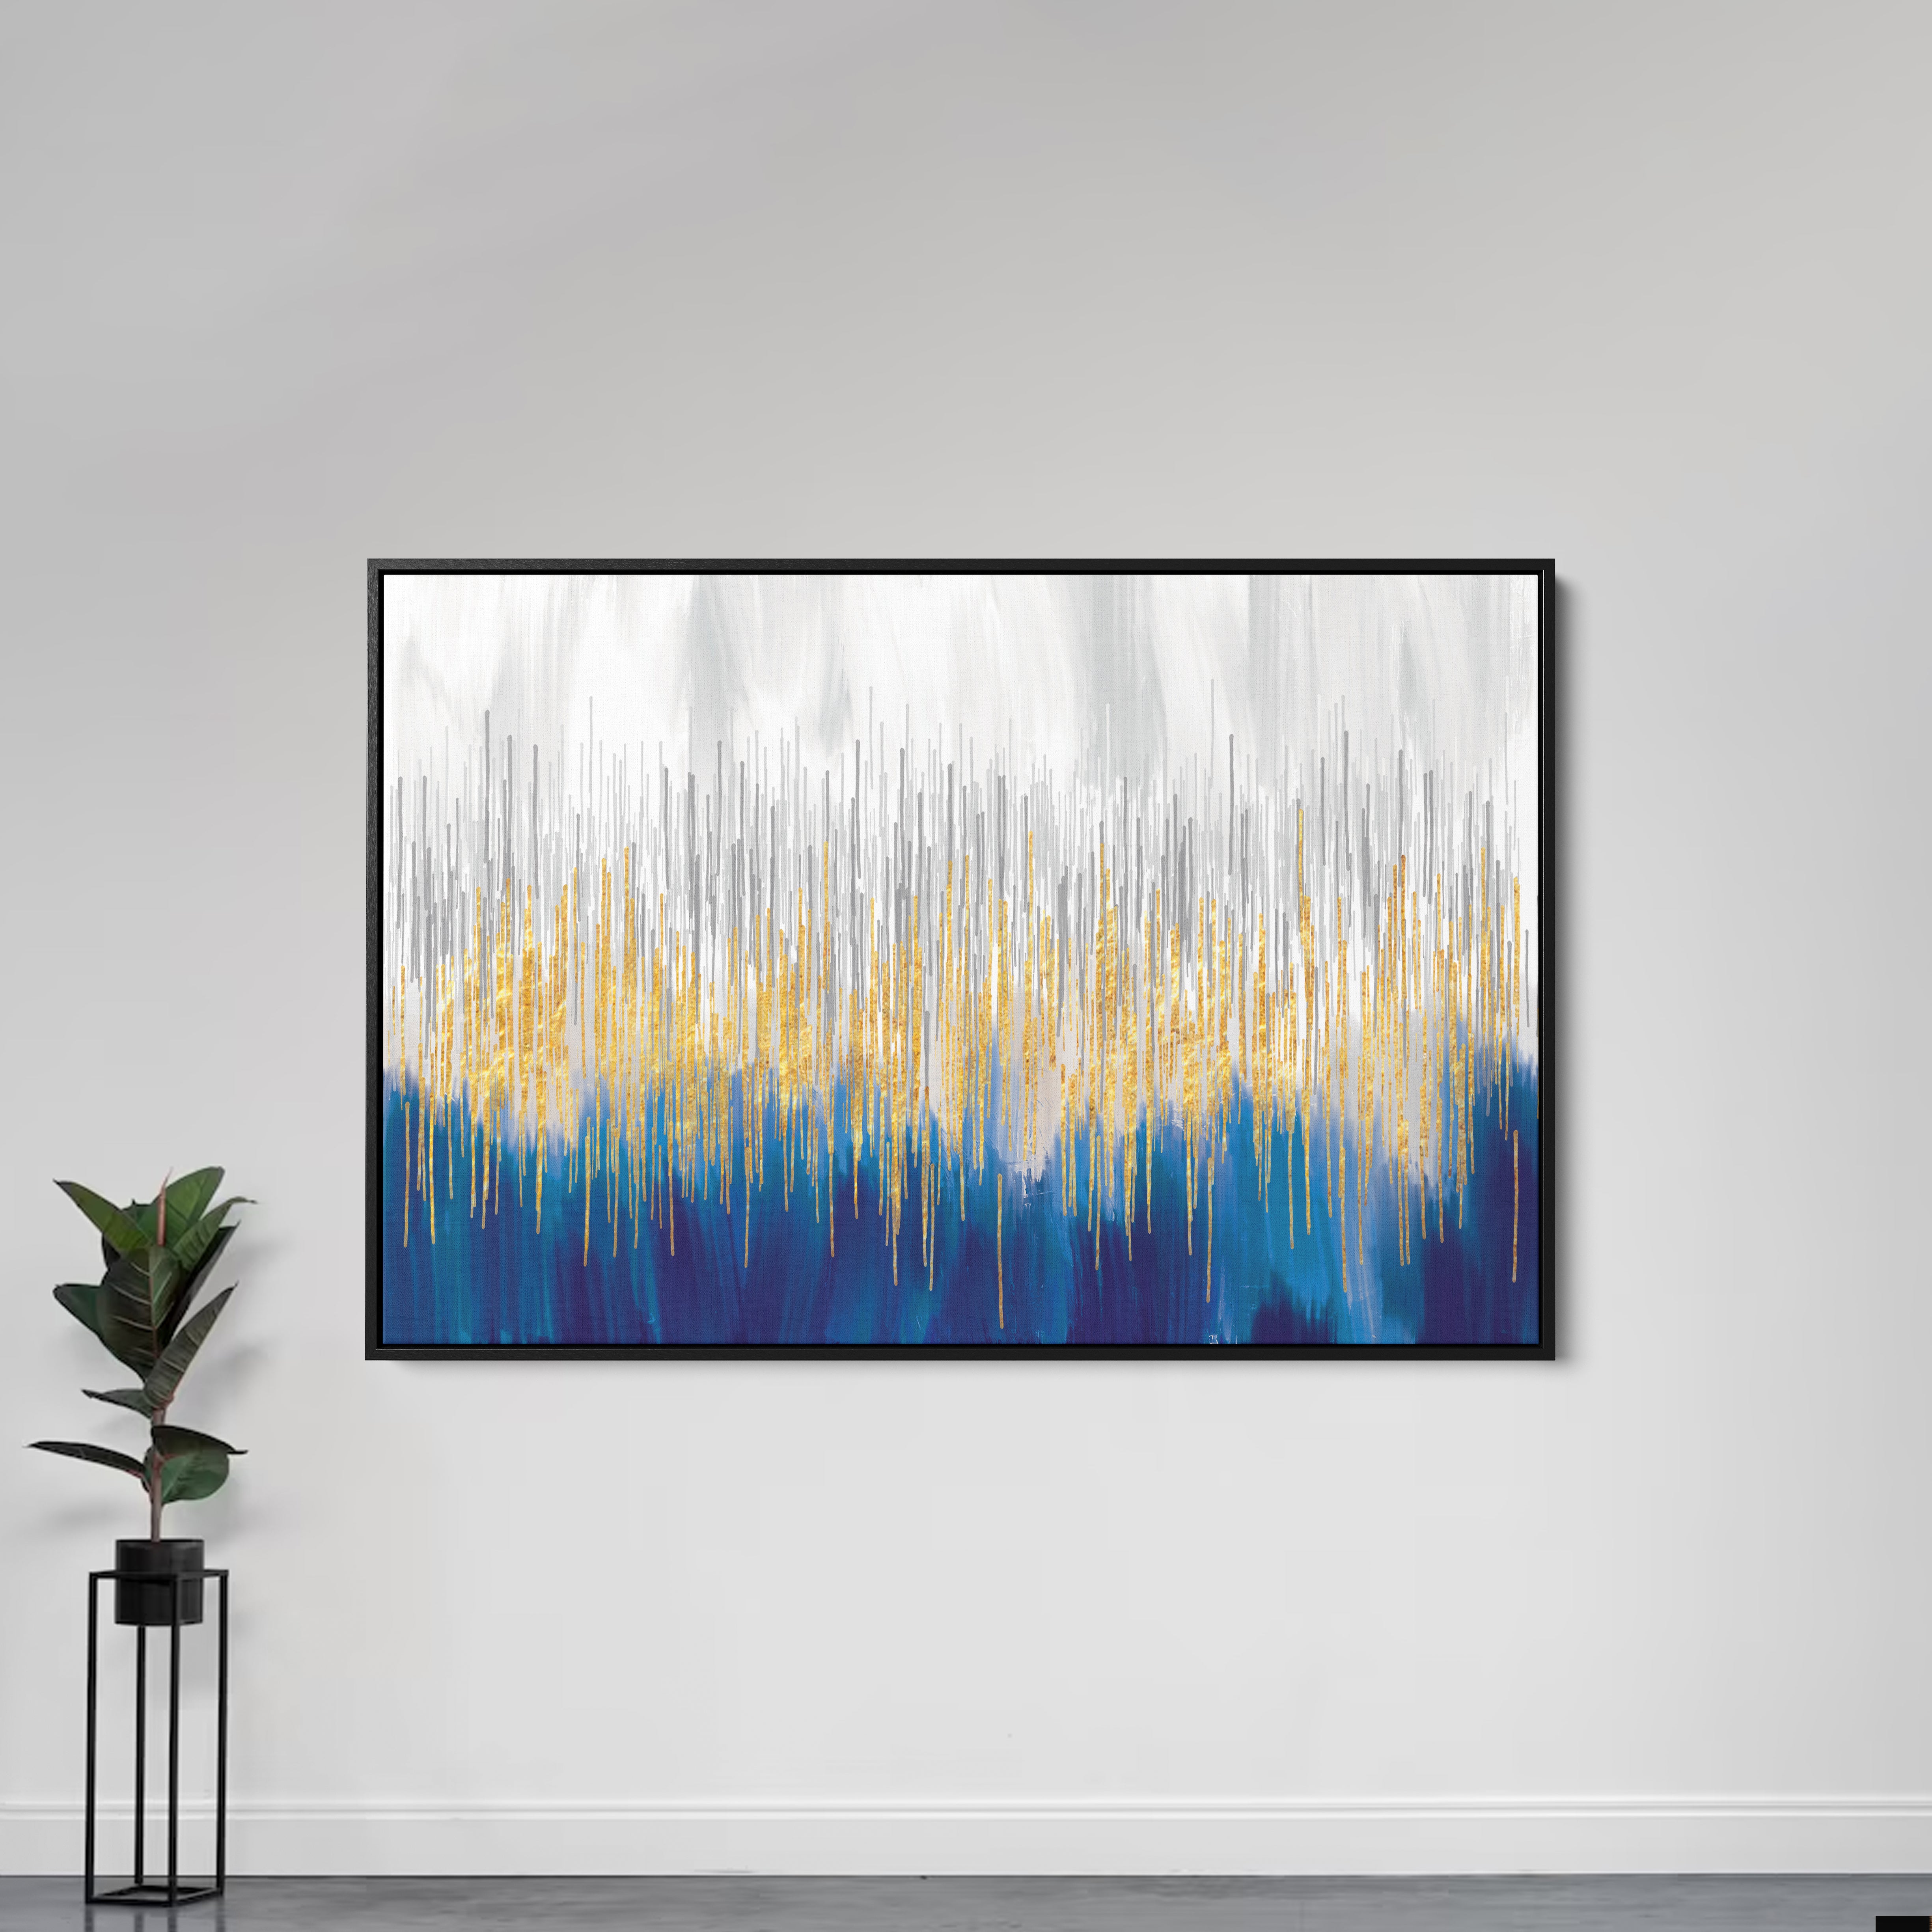 Modern Abstract Design Canvas Wall Painting